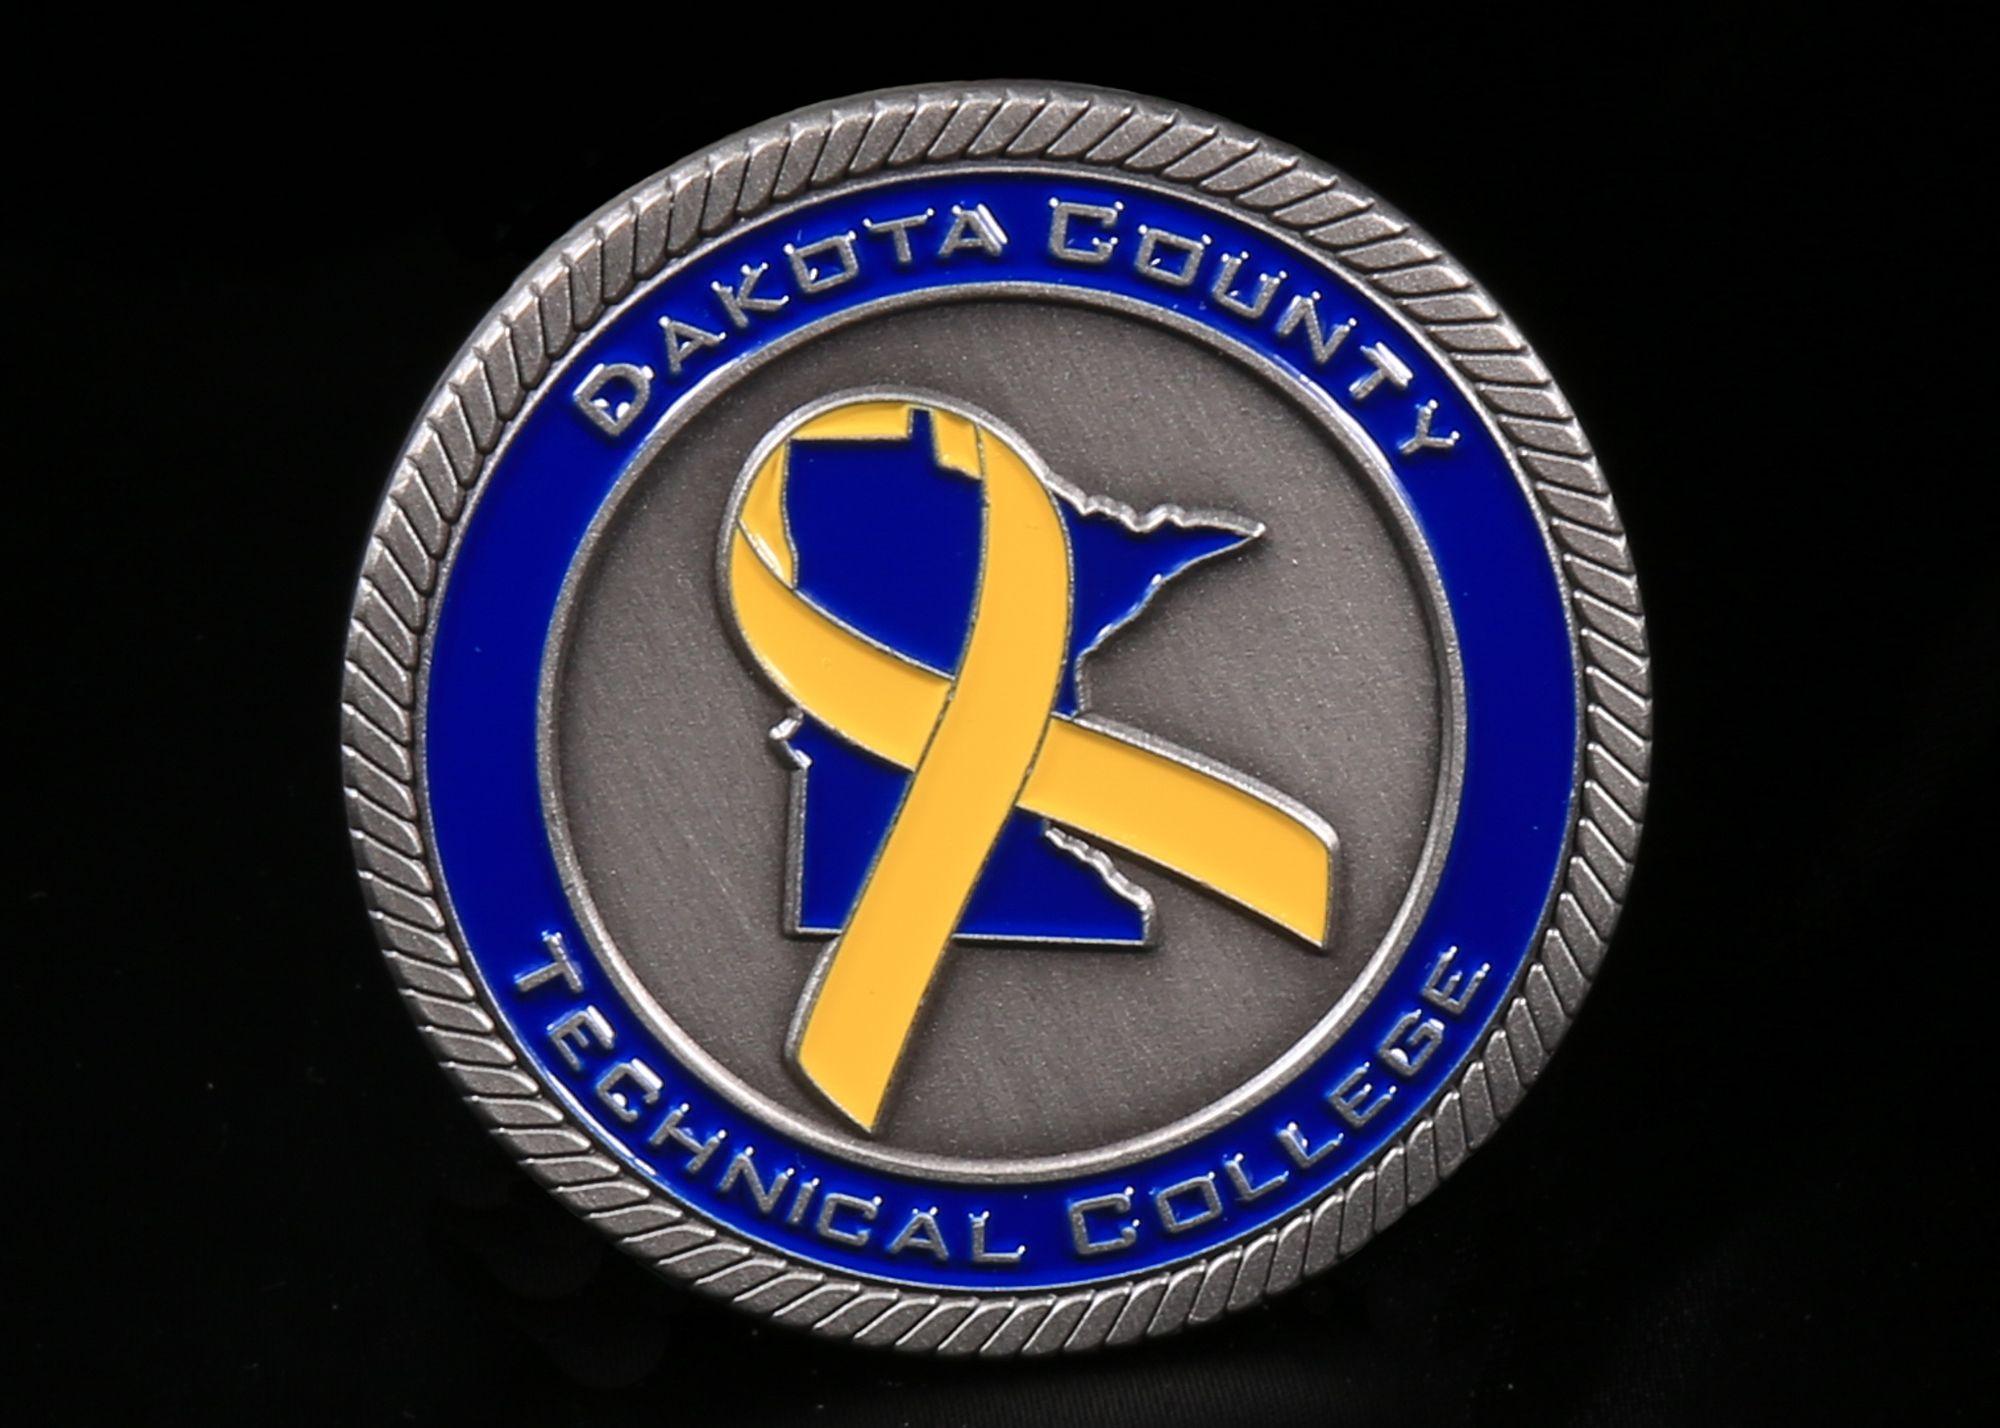 Blue and Yellow Ribbon Logo - Beyond the Yellow Ribbon Challenge Coins | DCTC News